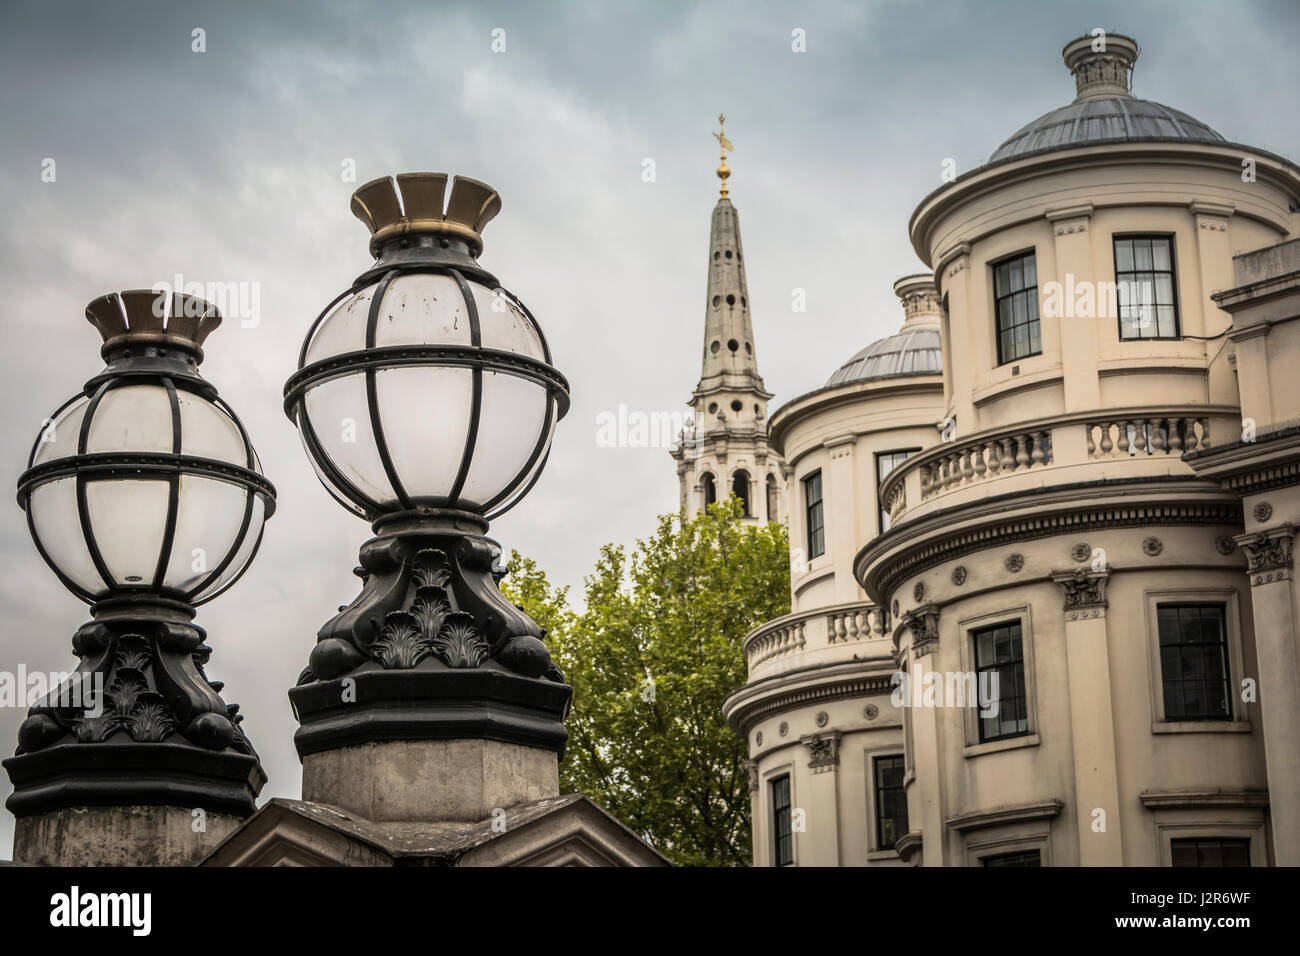 Decorative courtyard lamps in the forecourt of Charing Cross railway station in London, England, UK Stock Photo